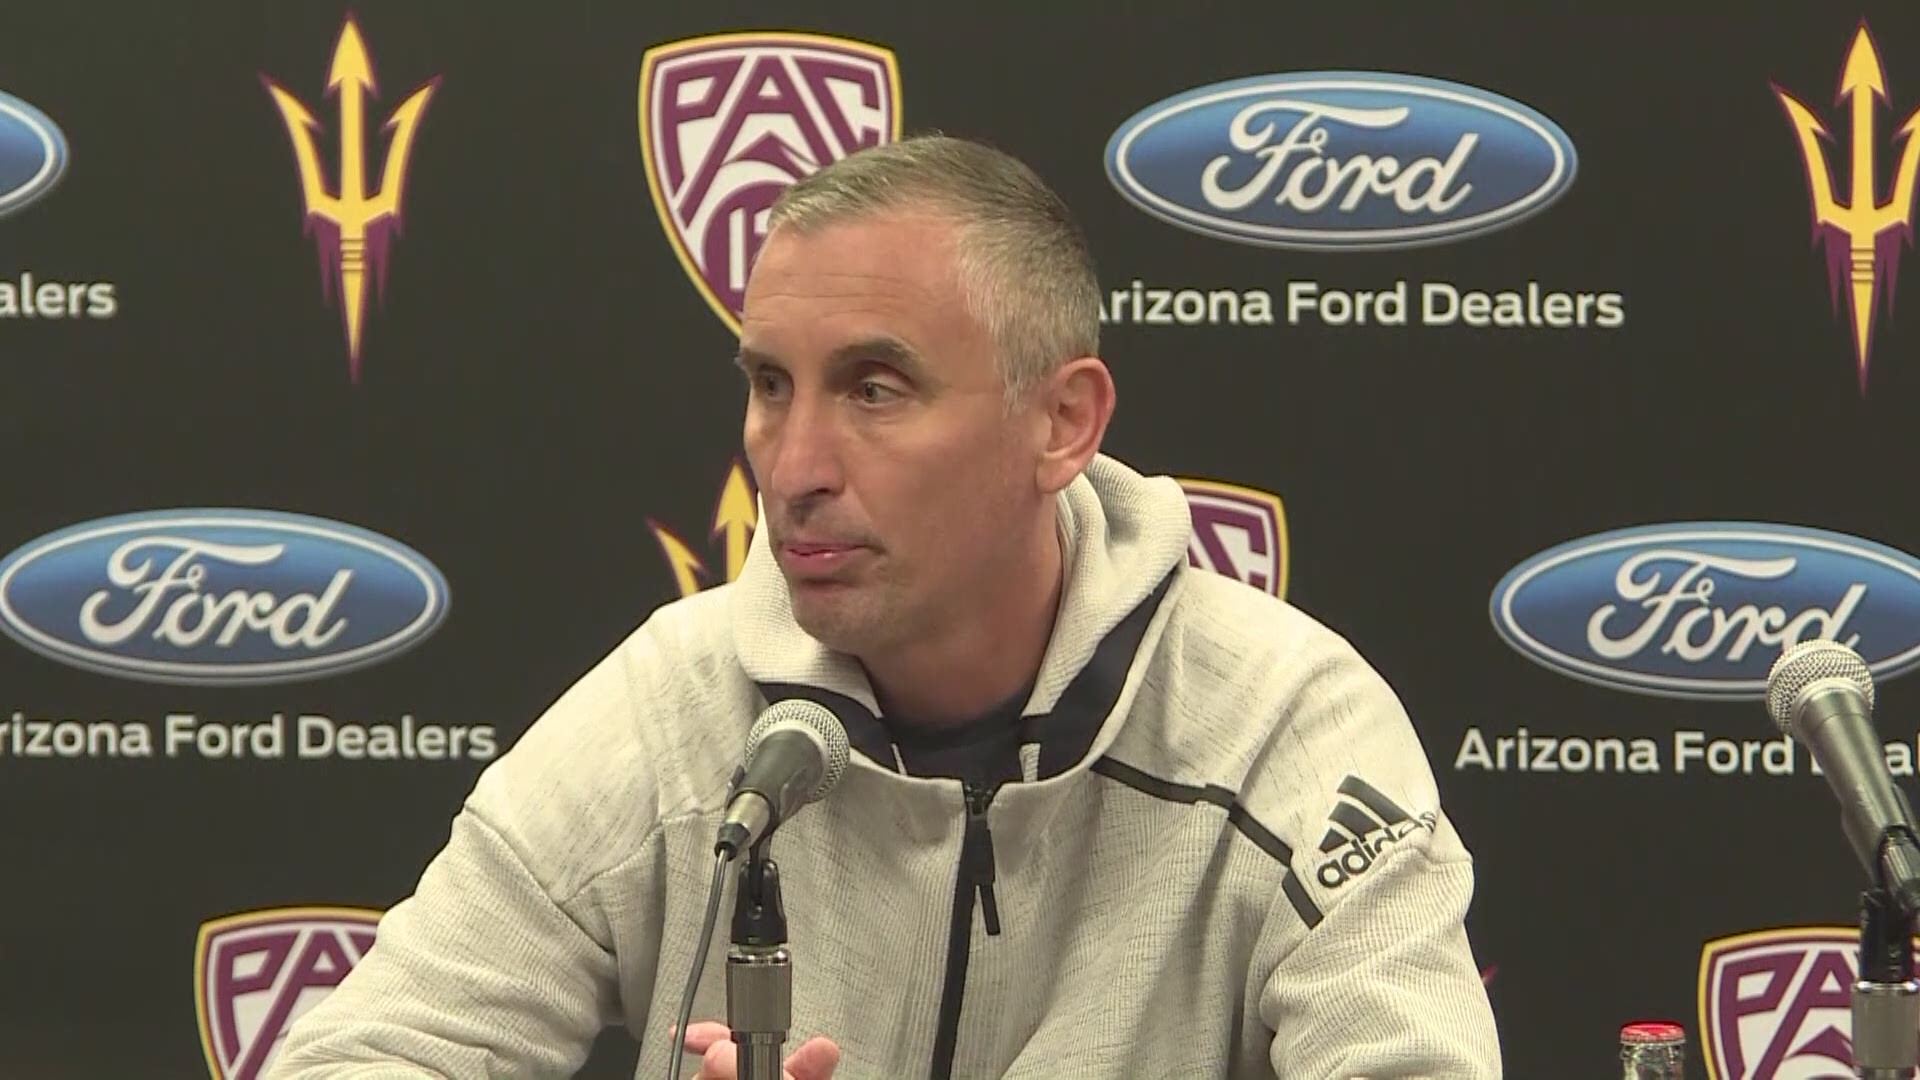 ASU suffered it's worst loss of the year falling to Washington State 91-70 Thursday night.